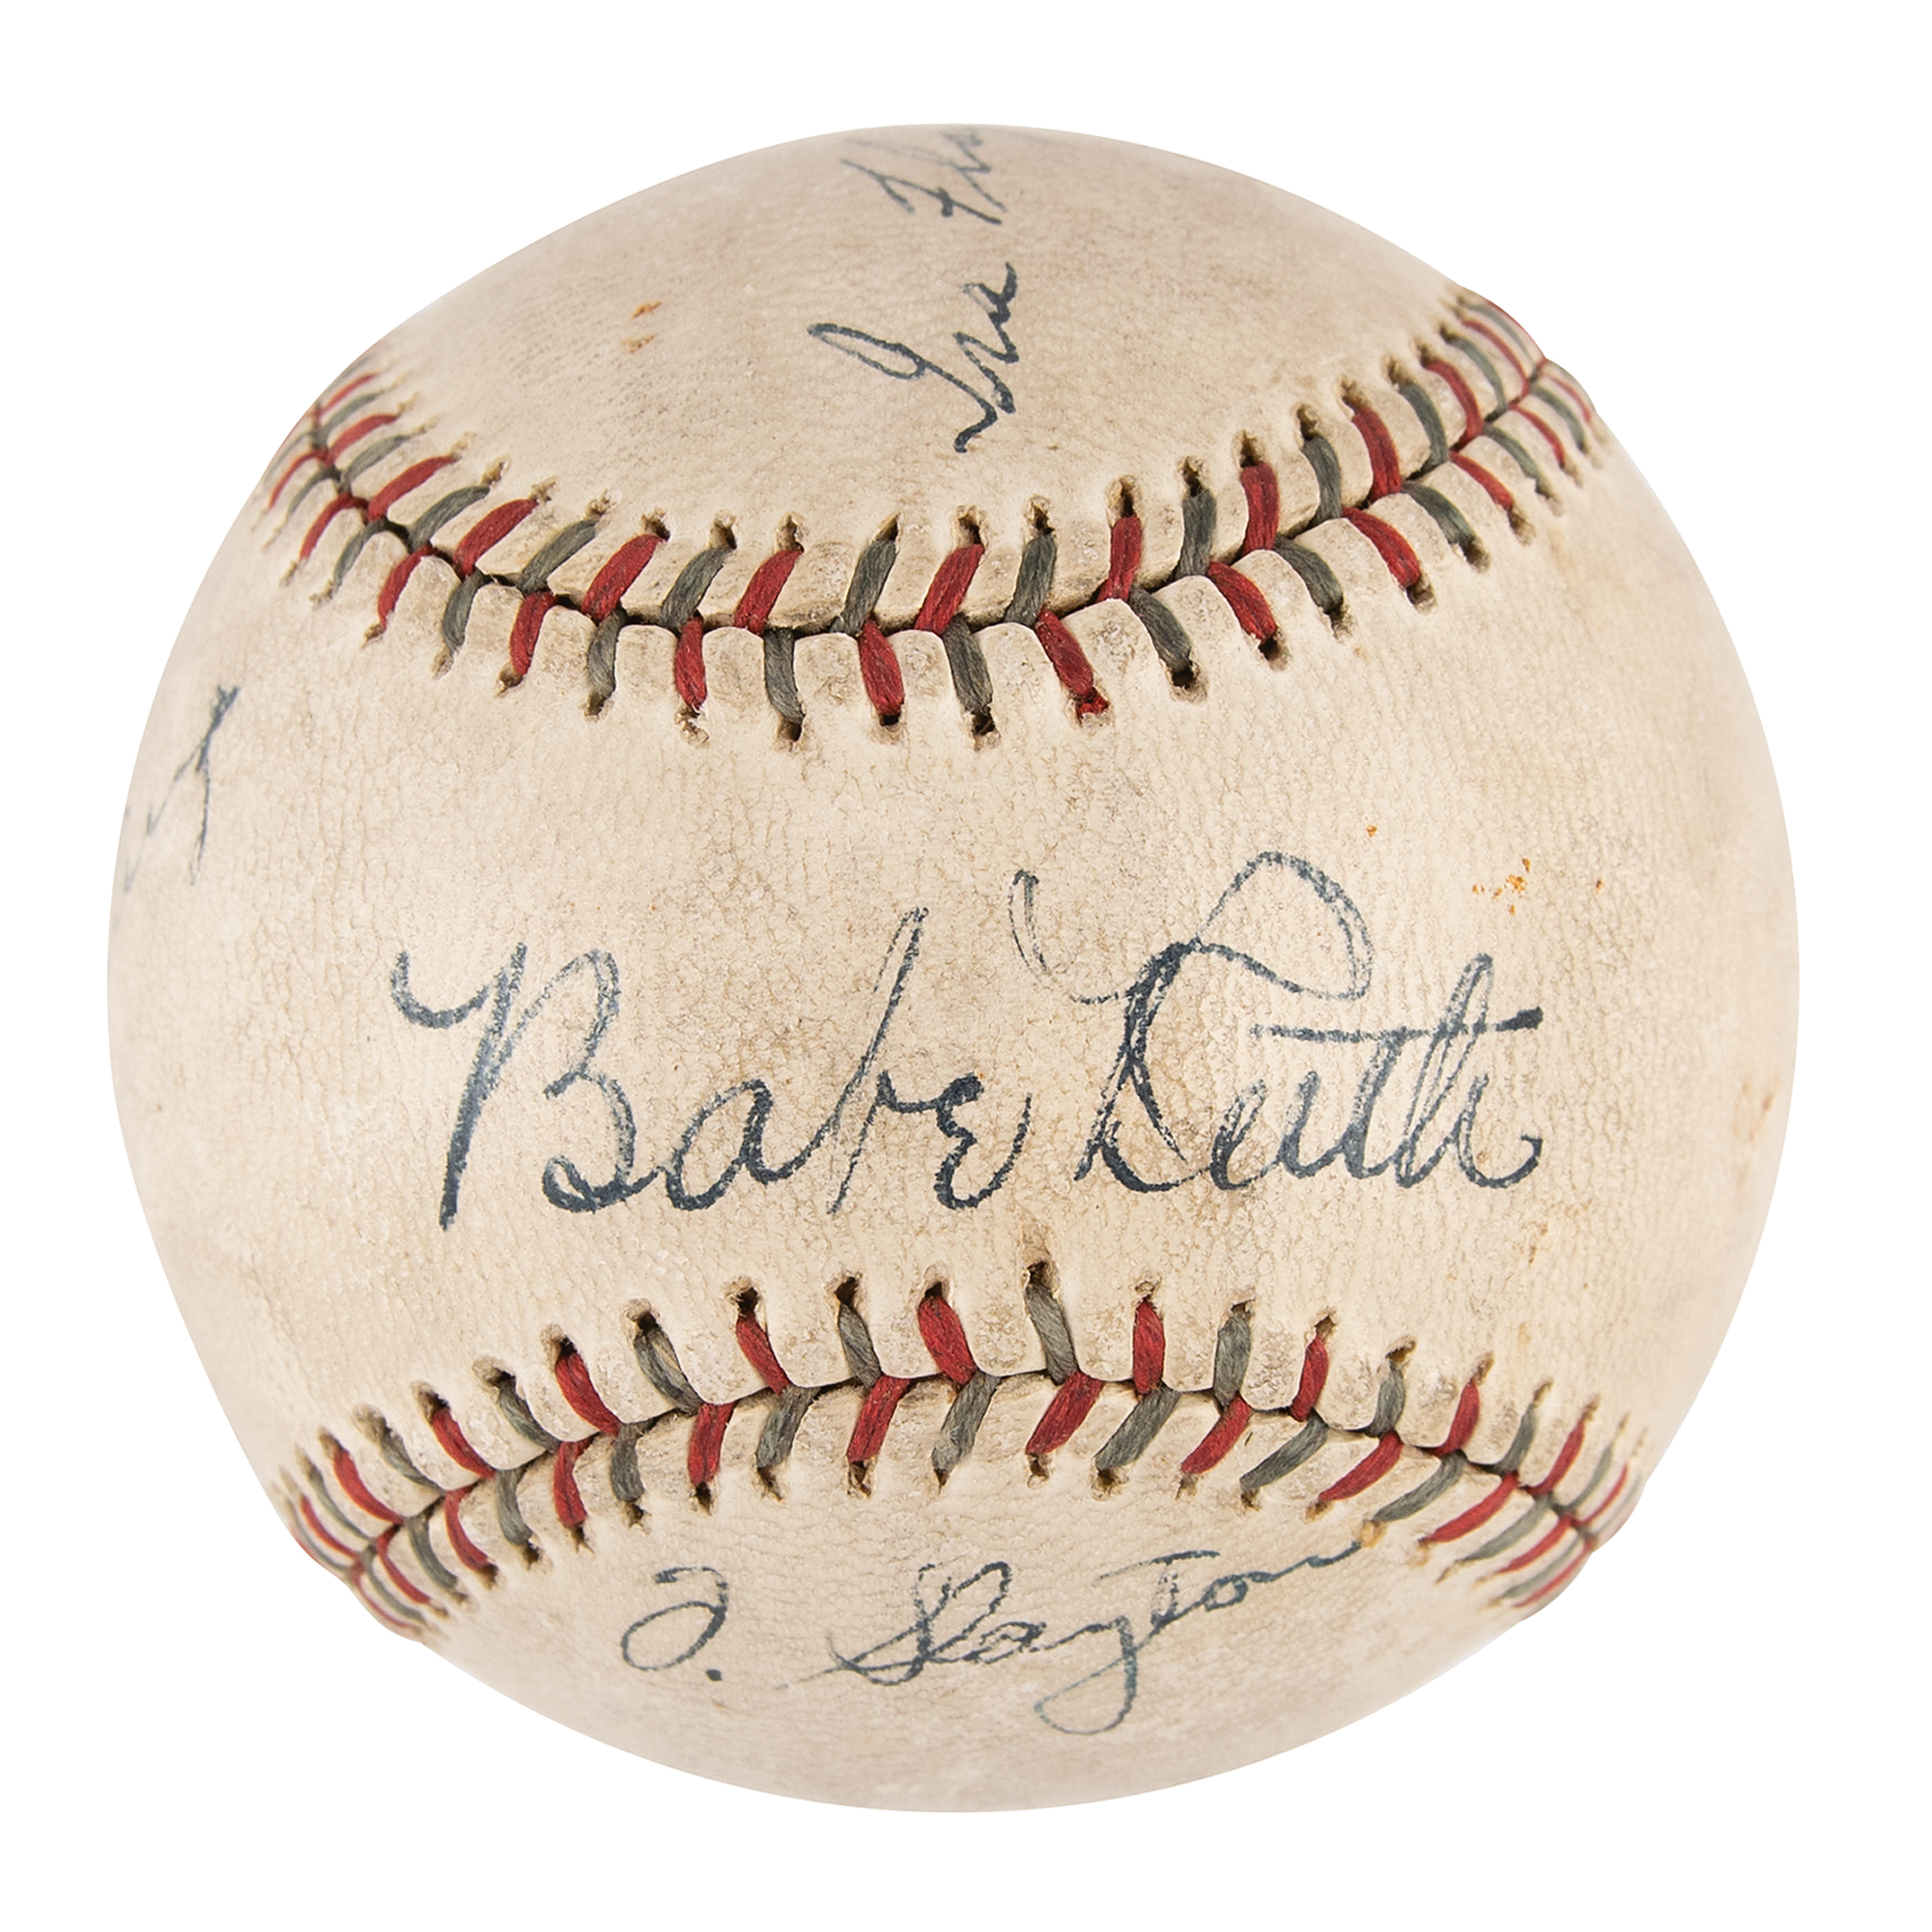 Lot #1806 Babe Ruth and Lou Gehrig Signed Baseball